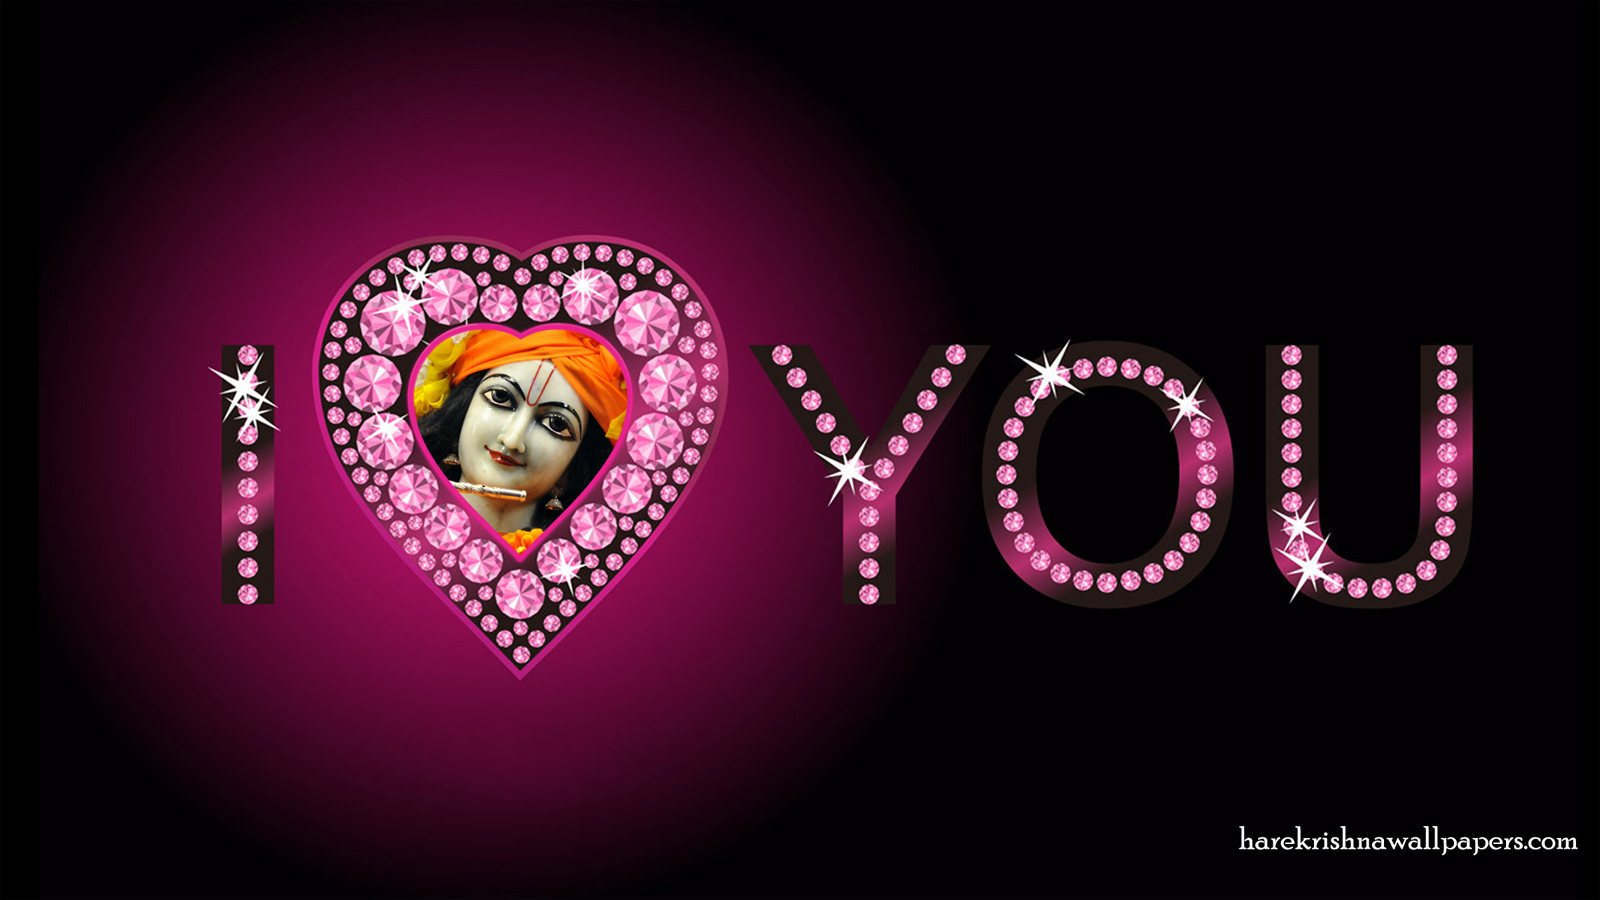 I Love You Gopinath Wallpaper (001) Size 1600x900 Download